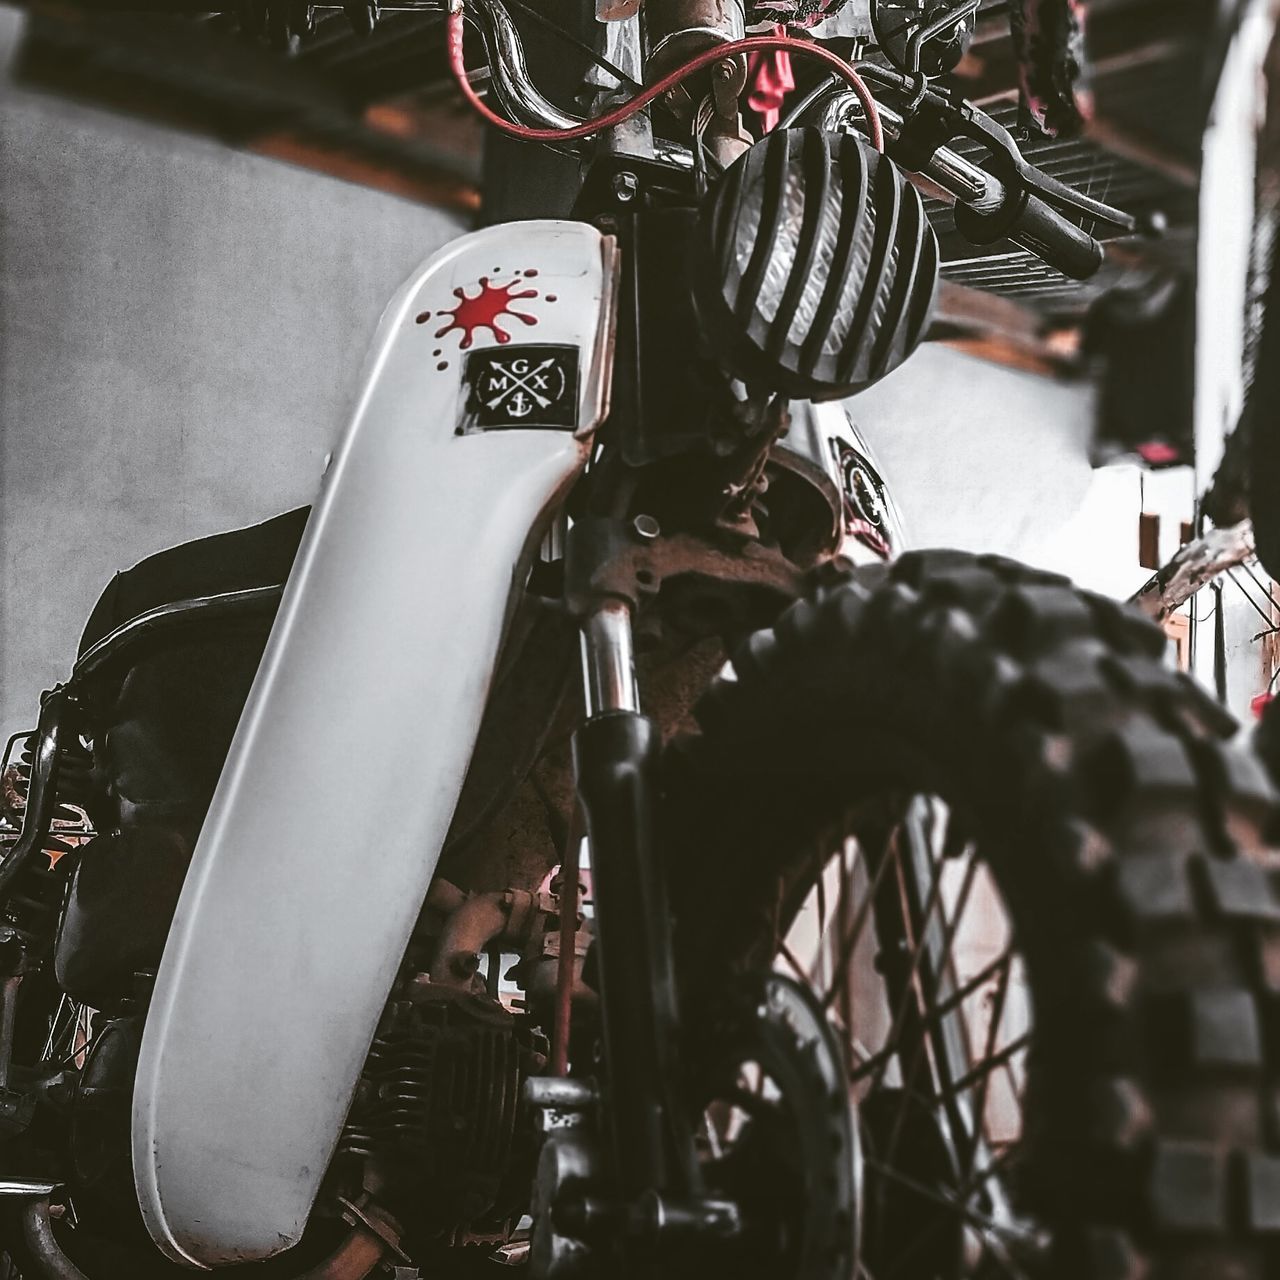 bicycle, mode of transportation, transportation, stationary, land vehicle, motorcycle, no people, parking, metal, travel, selective focus, handlebar, close-up, focus on foreground, day, handle, outdoors, wheel, garage